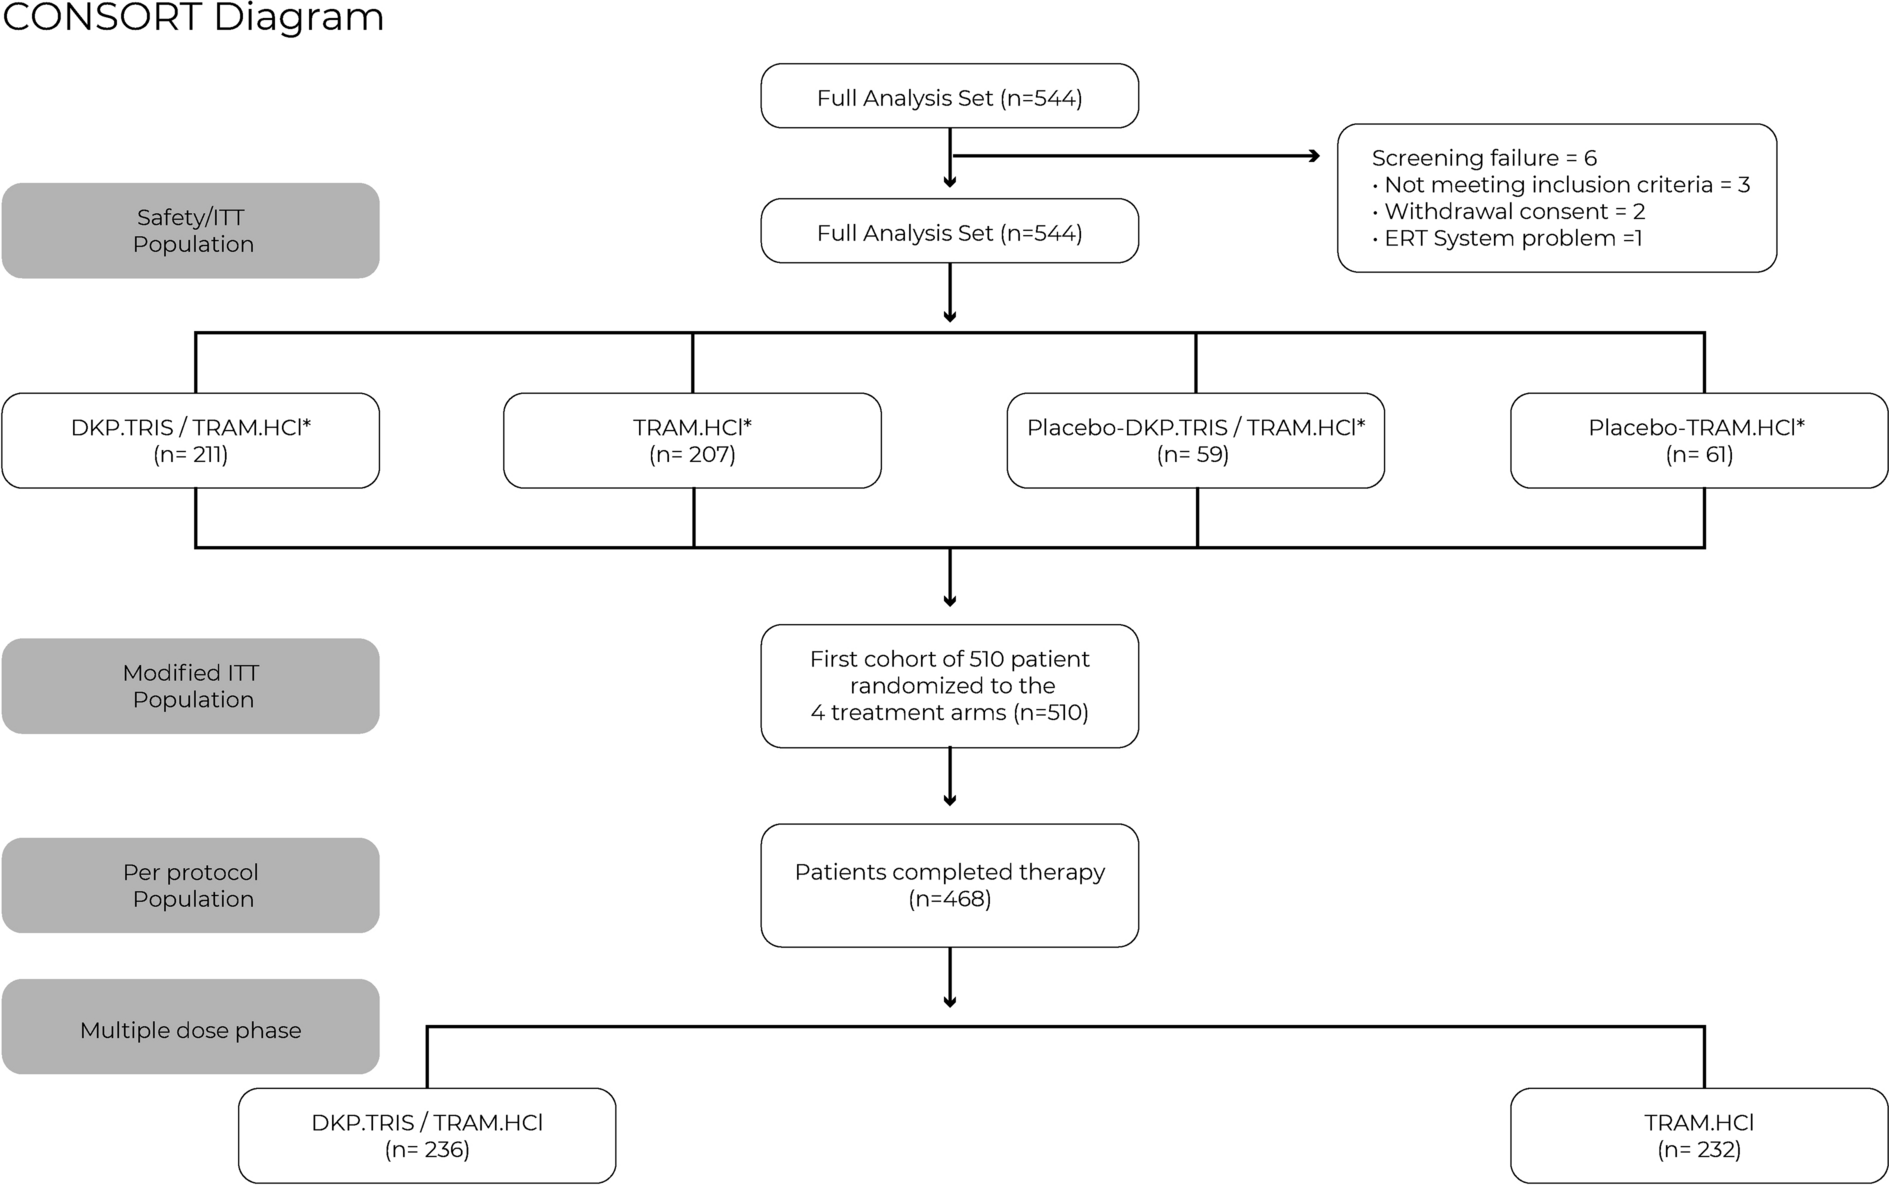 Dexketoprofen Trometamol and Tramadol Hydrochloride Fixed-Dose Combination in Moderate to Severe Acute Low Back Pain: A Phase IV, Randomized, Parallel Group, Placebo, Active-Controlled Study (DANTE)